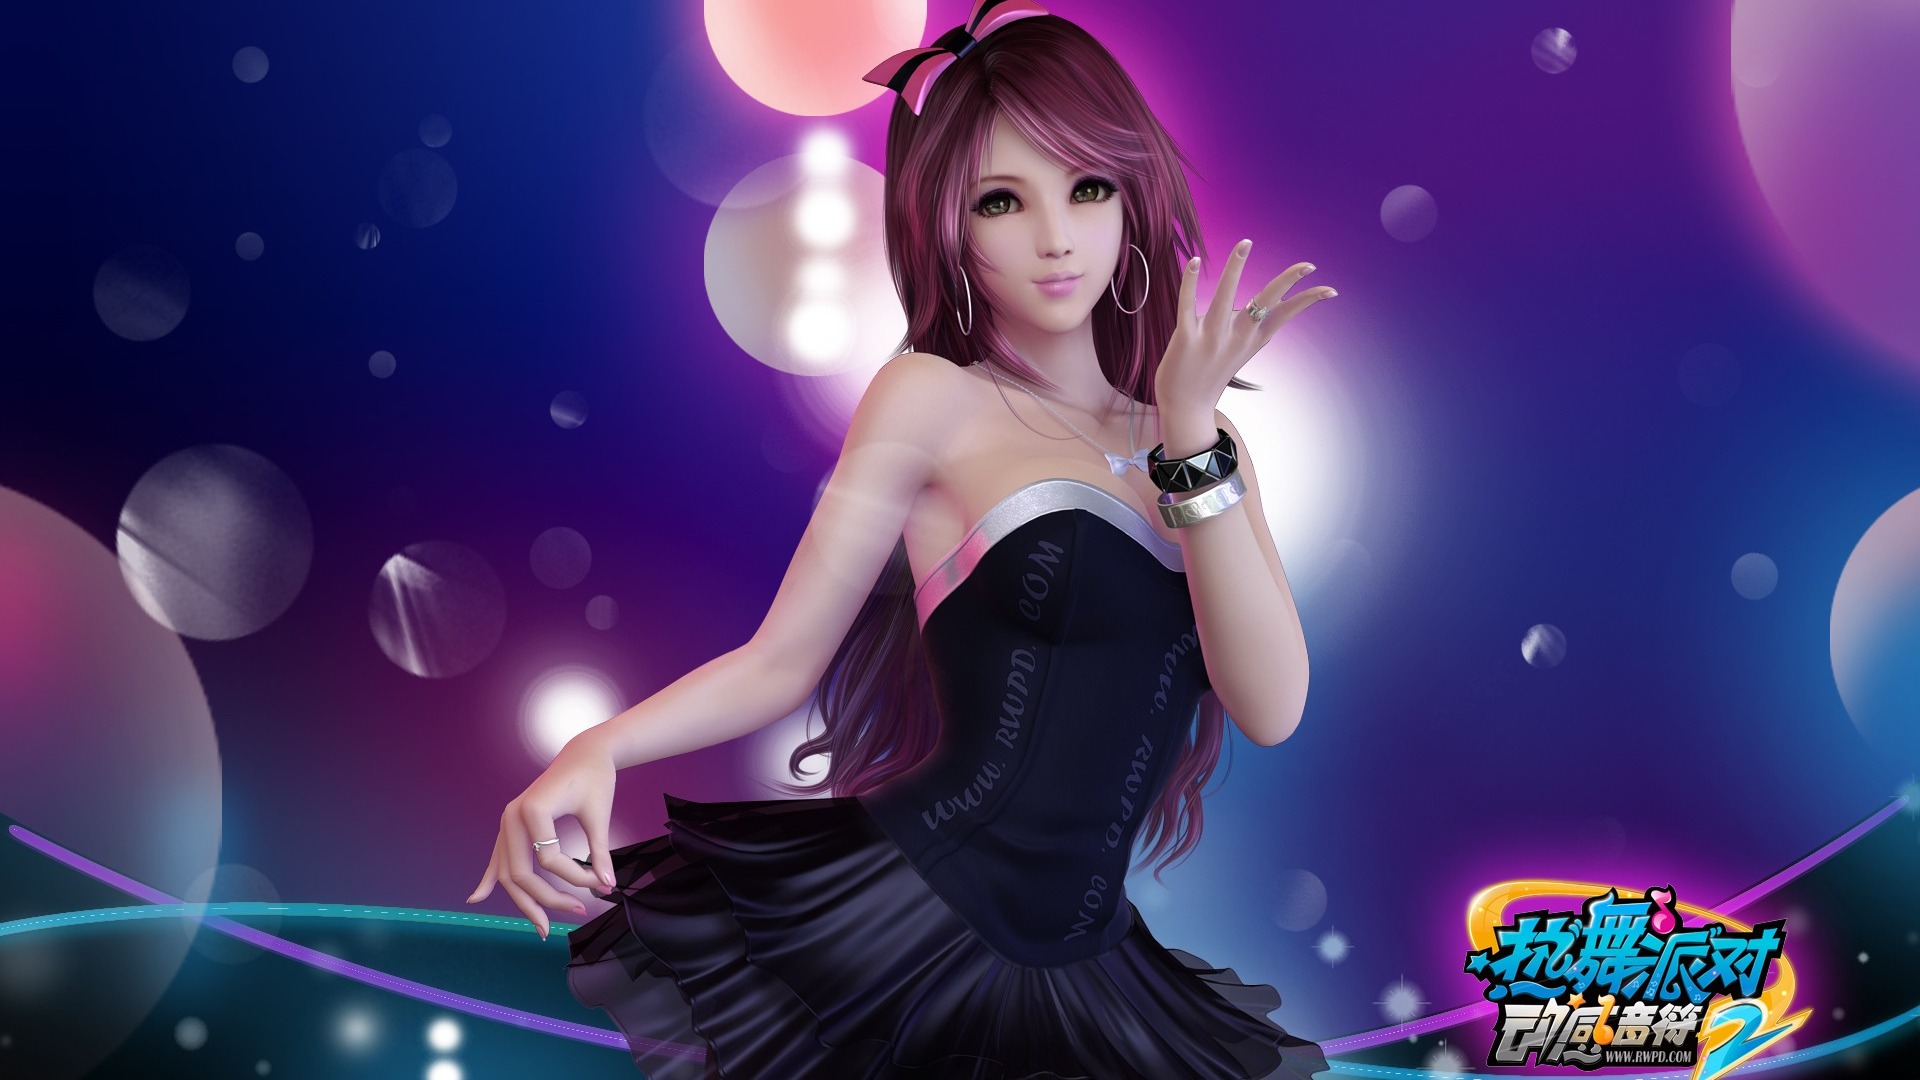 Online game Hot Dance Party II official wallpapers #32 - 1920x1080